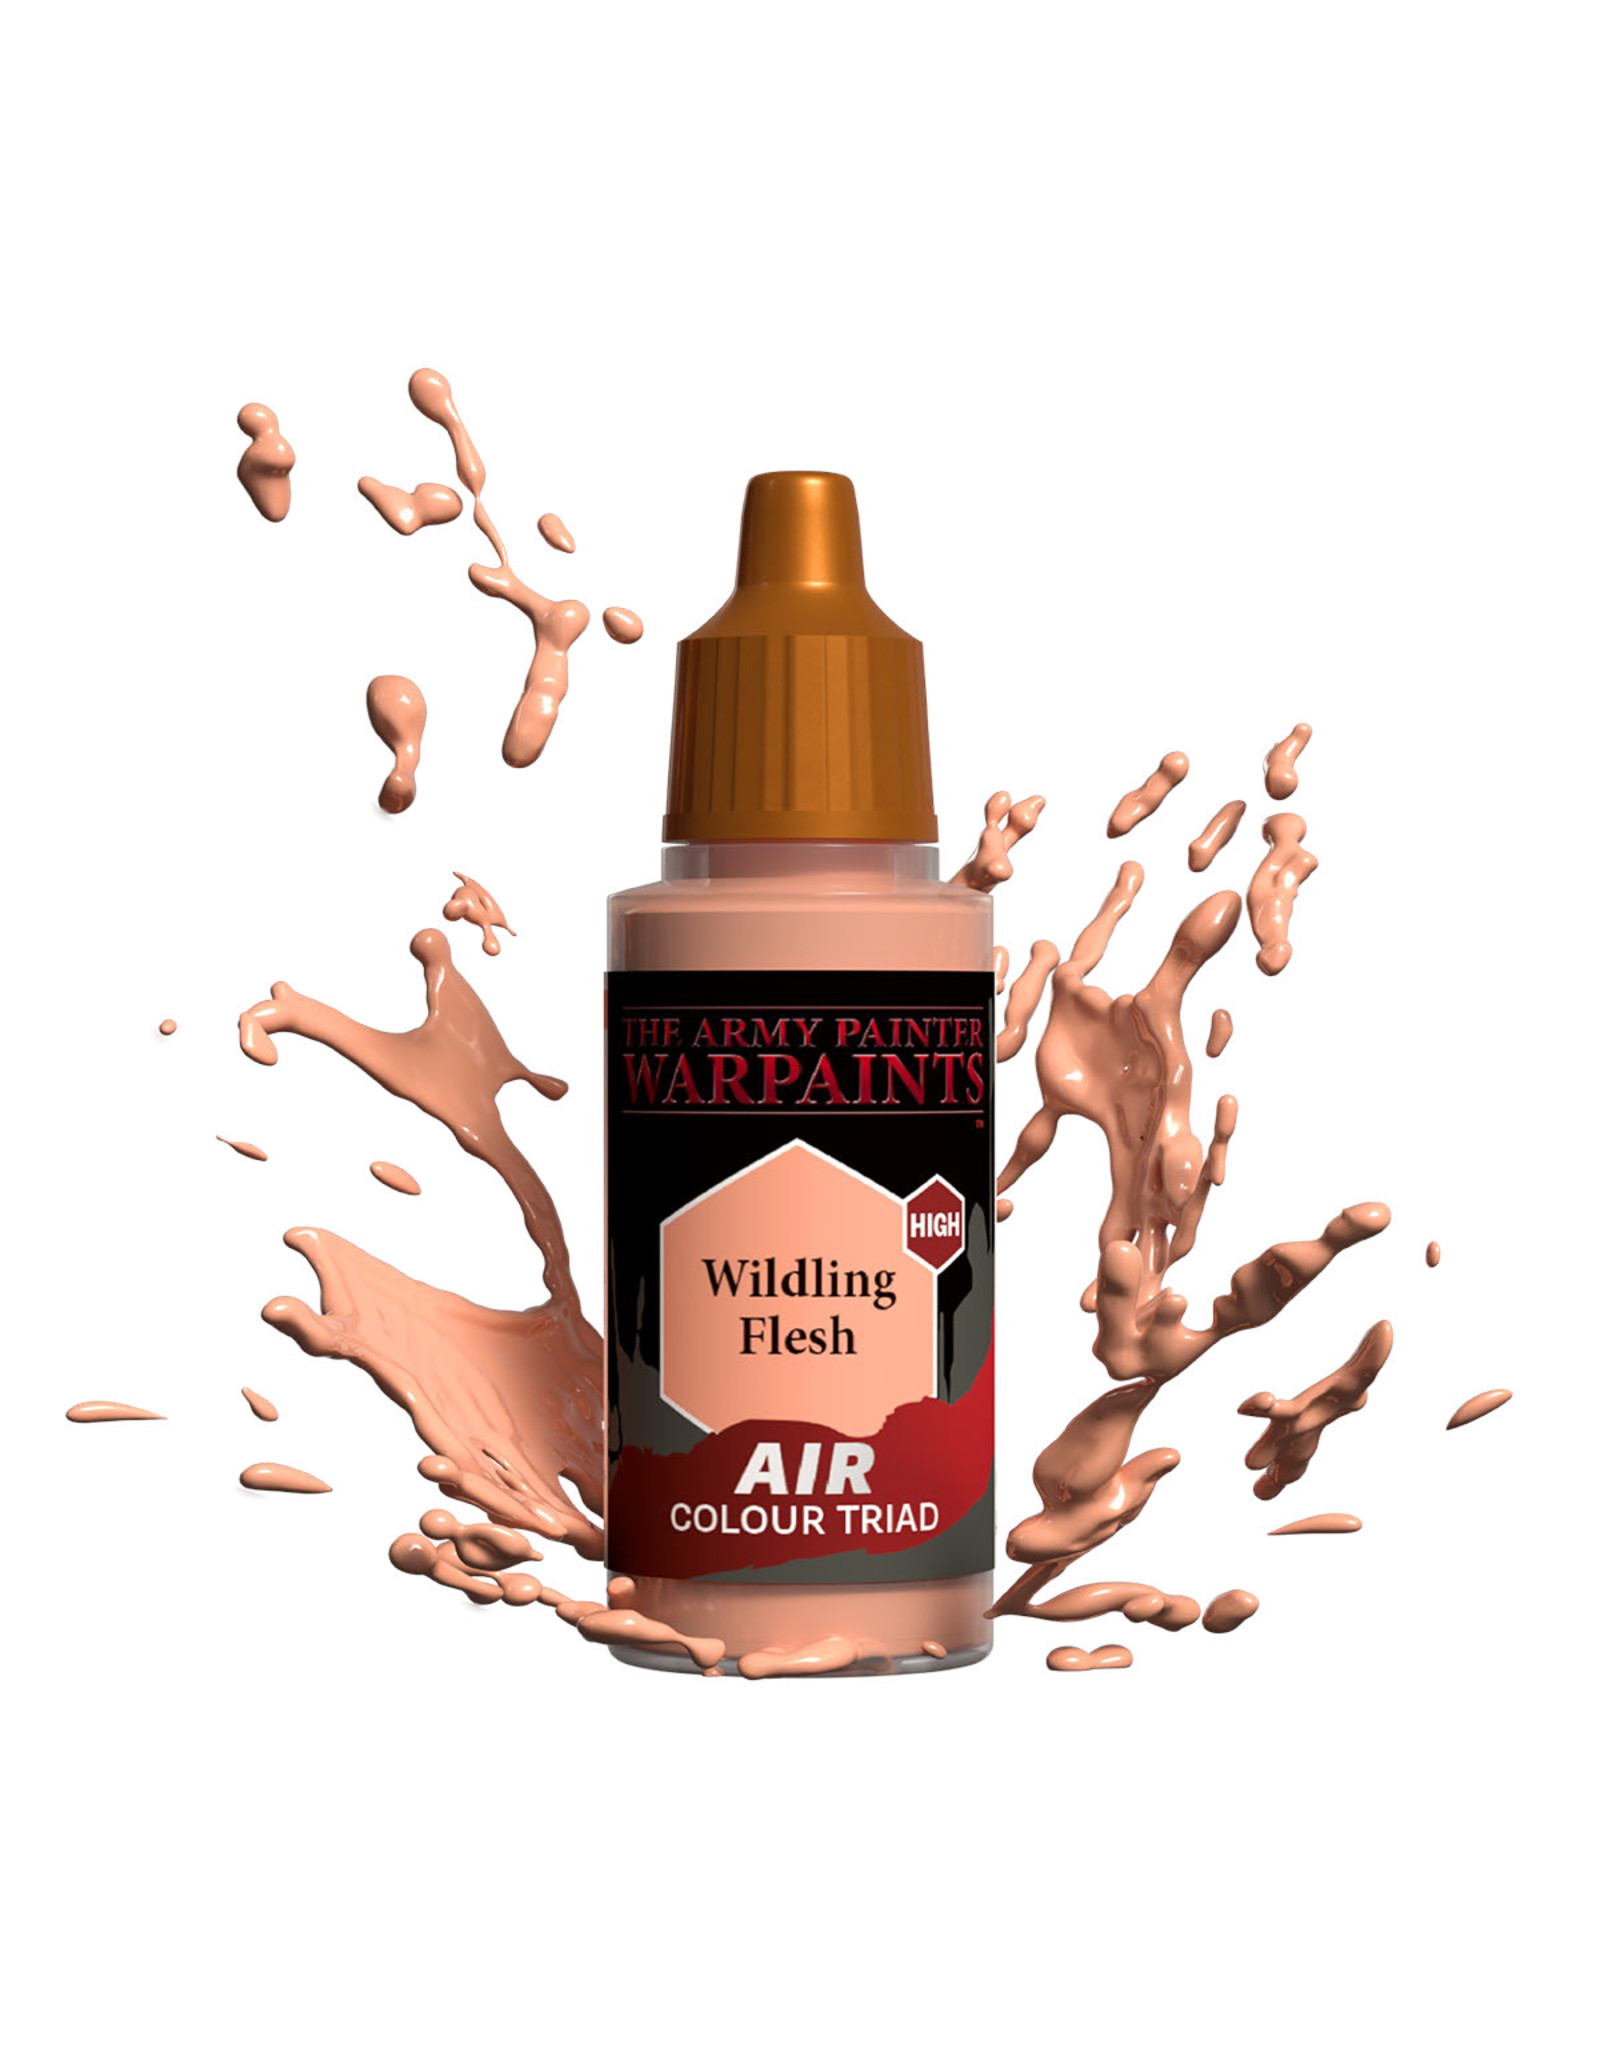 The Army Painter The Army Painter Warpaints Air: Wildling Flesh